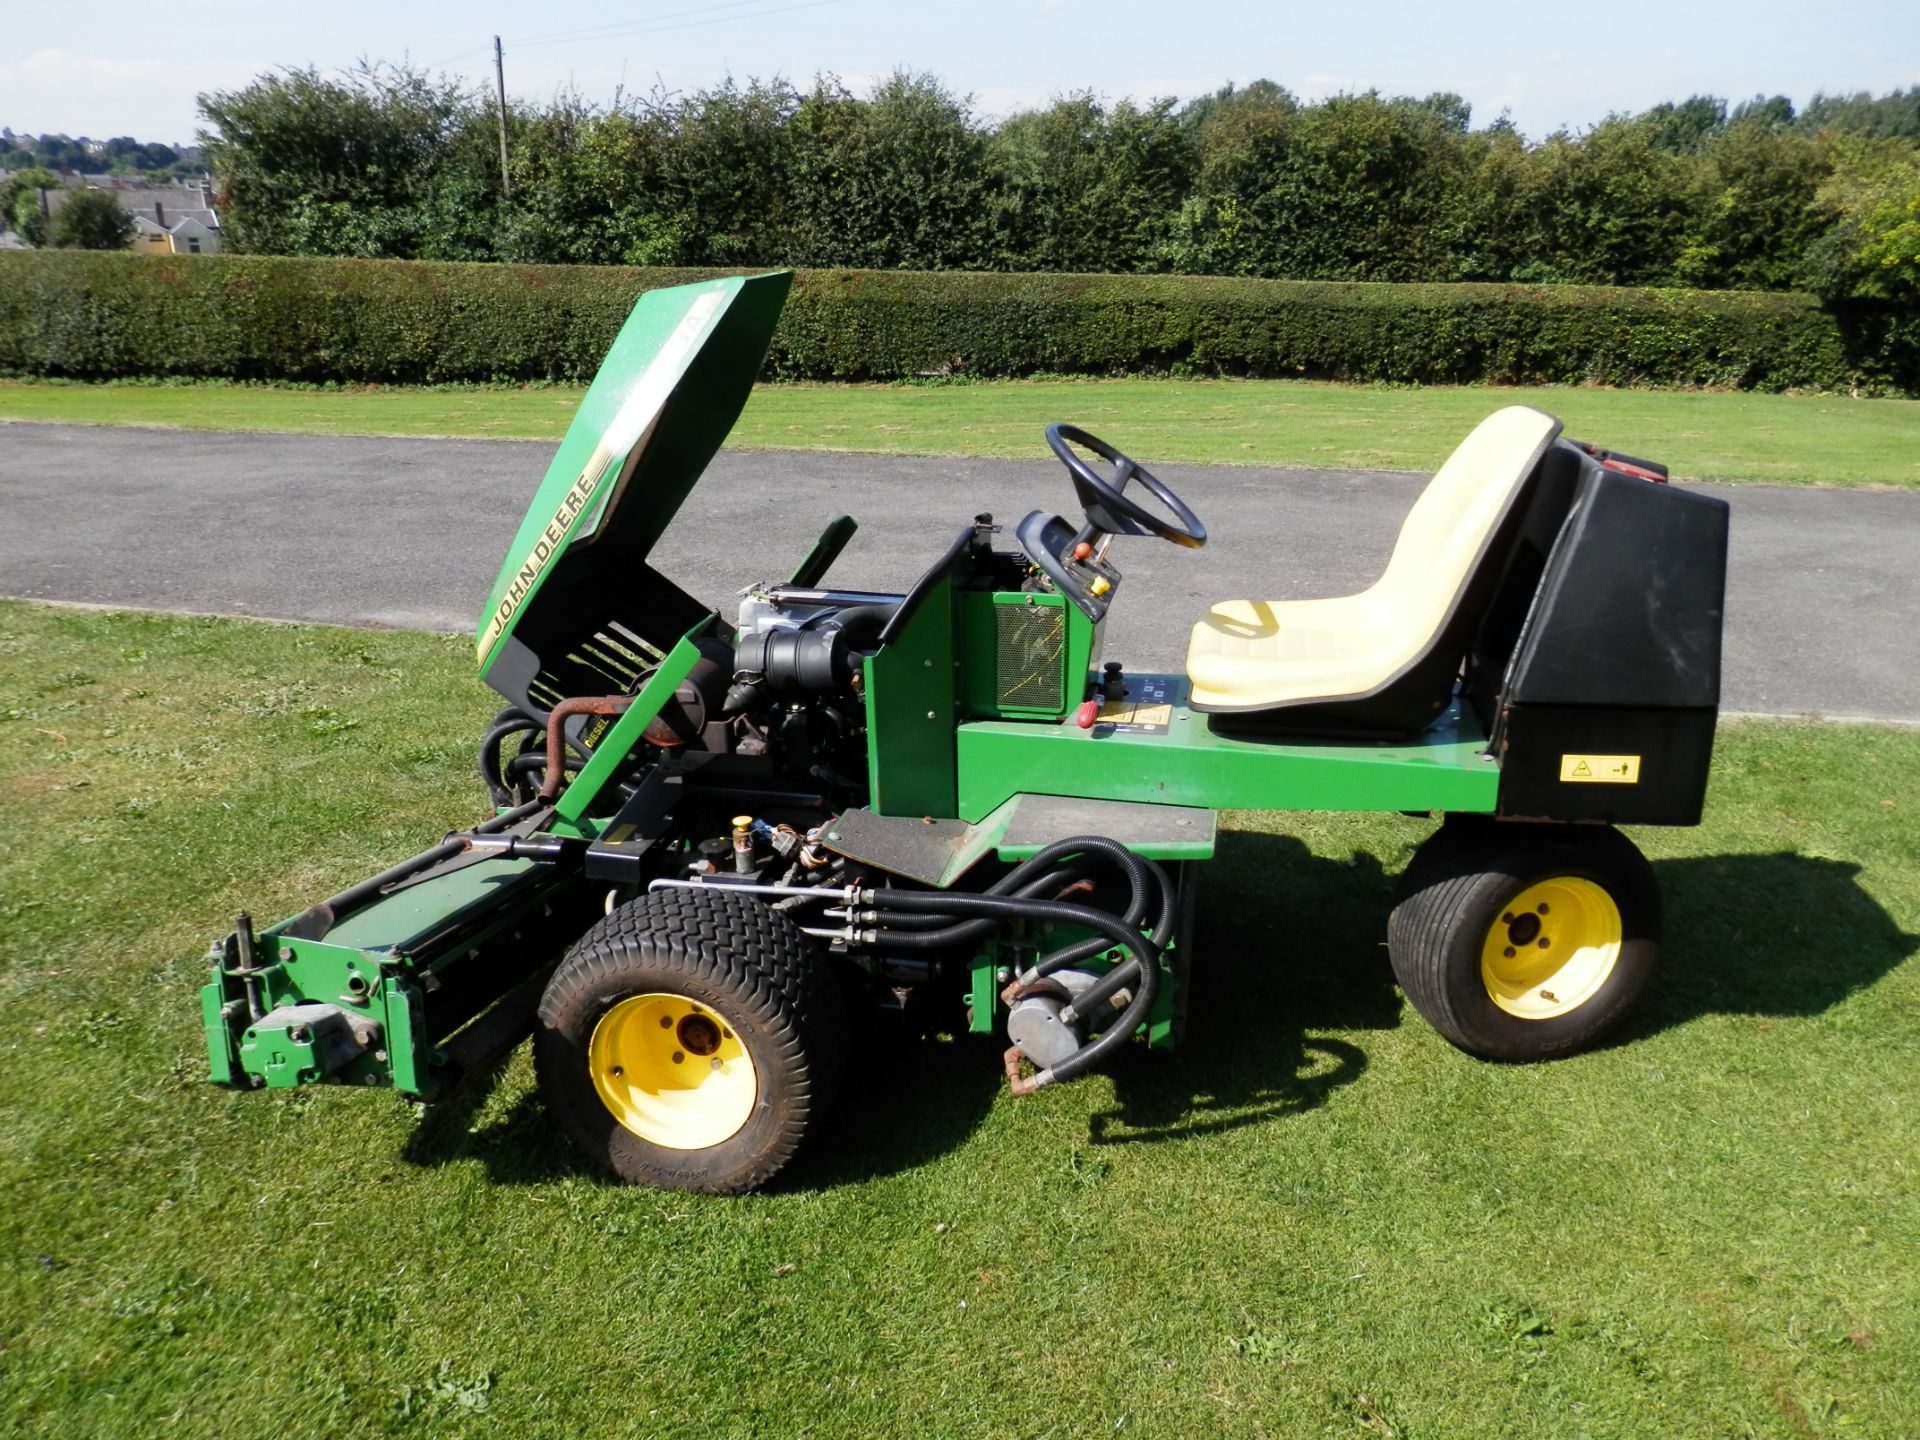 1996 JOHN DEERE 2653A RIDE ON GANG MOWER,CHECKED & WORKING. WIDE CUT, IDEAL FOR ESTATES/GOLF COURSES - Image 10 of 11